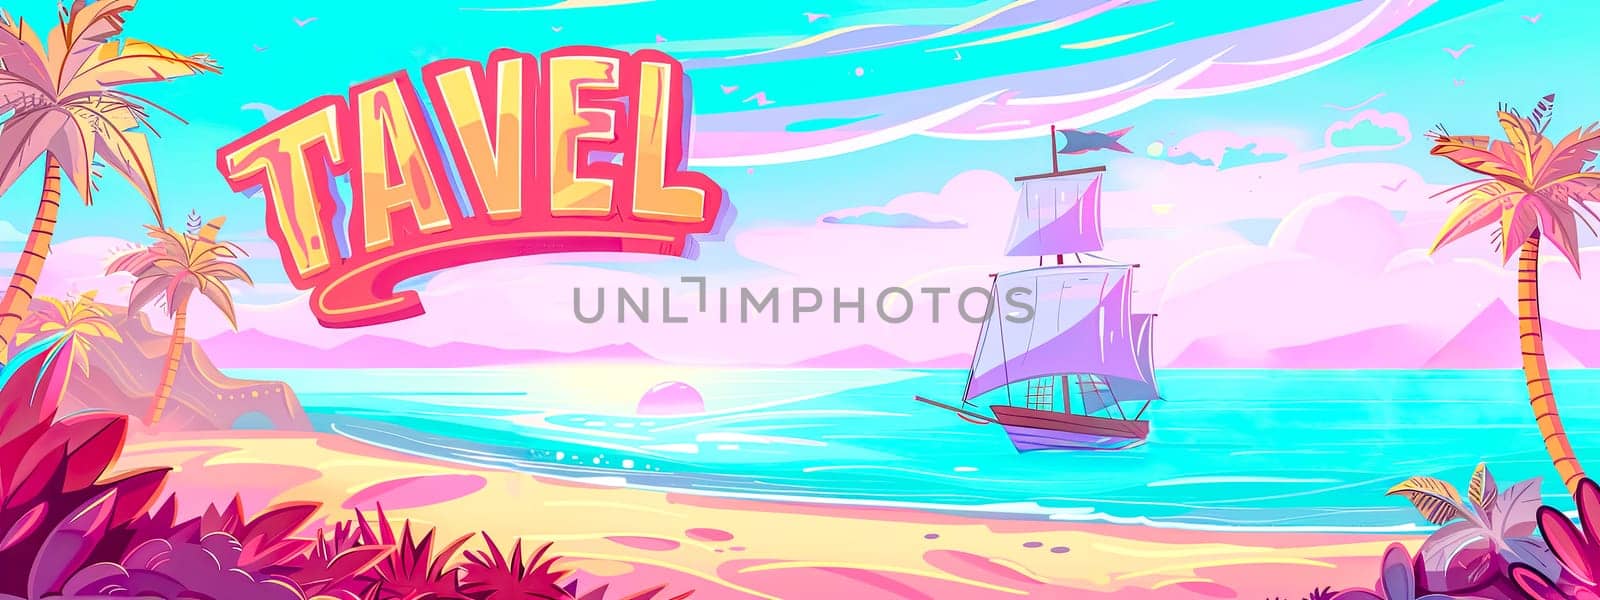 Vibrant cartoon banner depicting a scenic tropical beach with a sailboat, ideal for travel themes